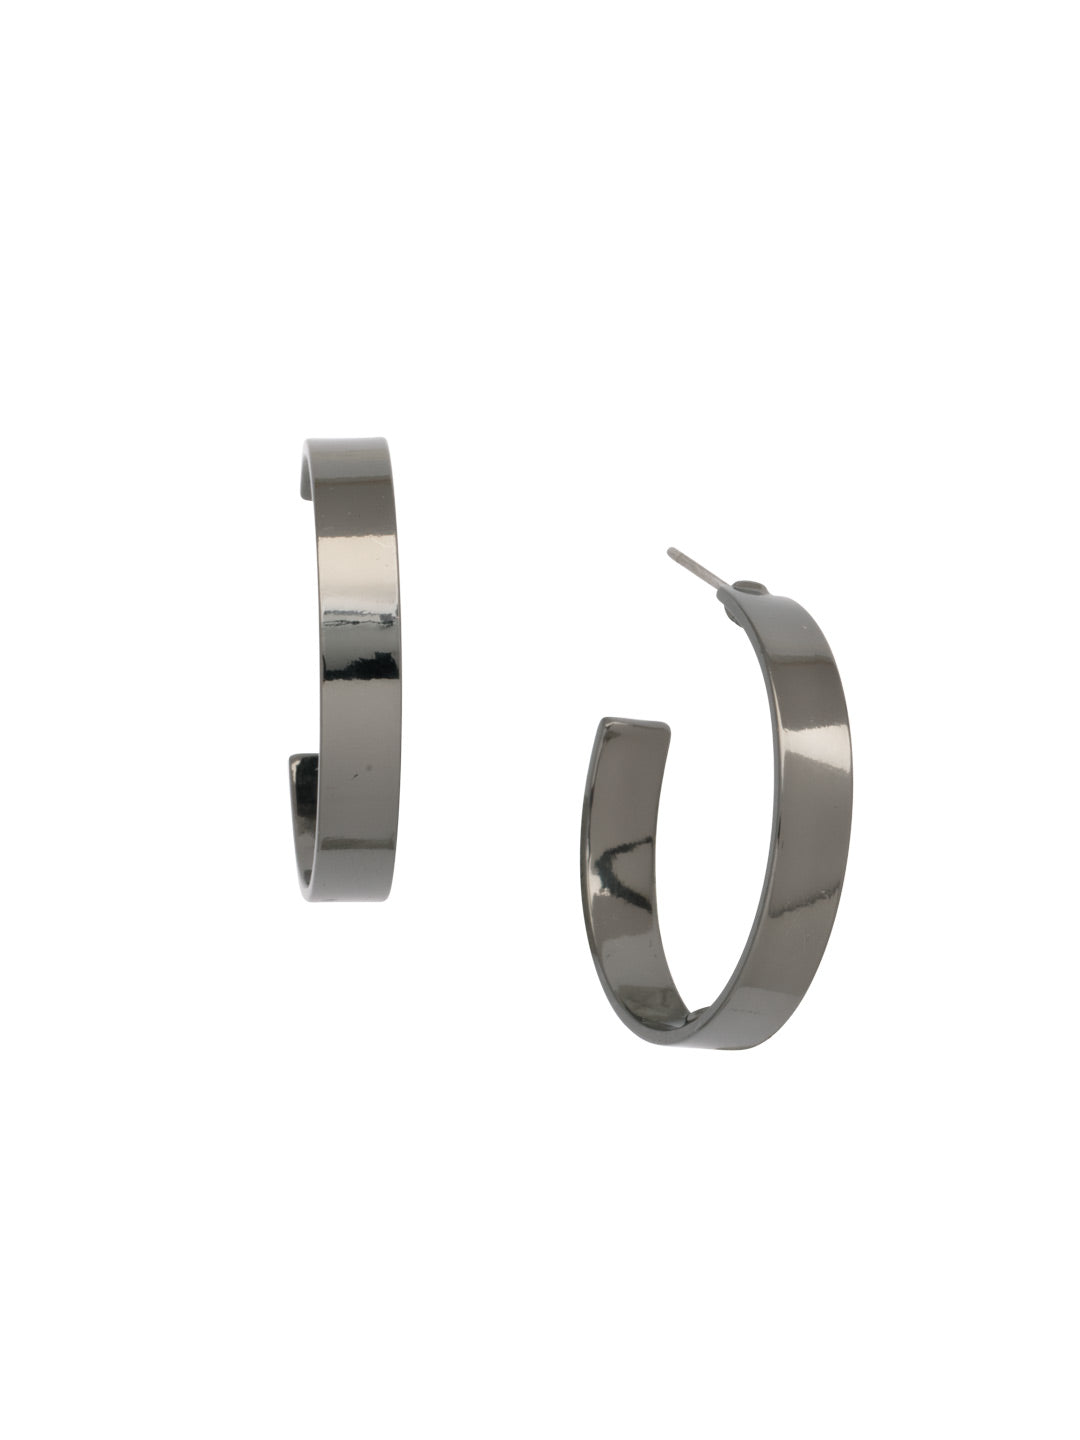 Bex Hoop Earrings - 4EFL15GMMTL - <p>The Bex Hoop Earrings feature a flat metal hoop on a post. From Sorrelli's Bare Metallic collection in our Gun Metal finish.</p>